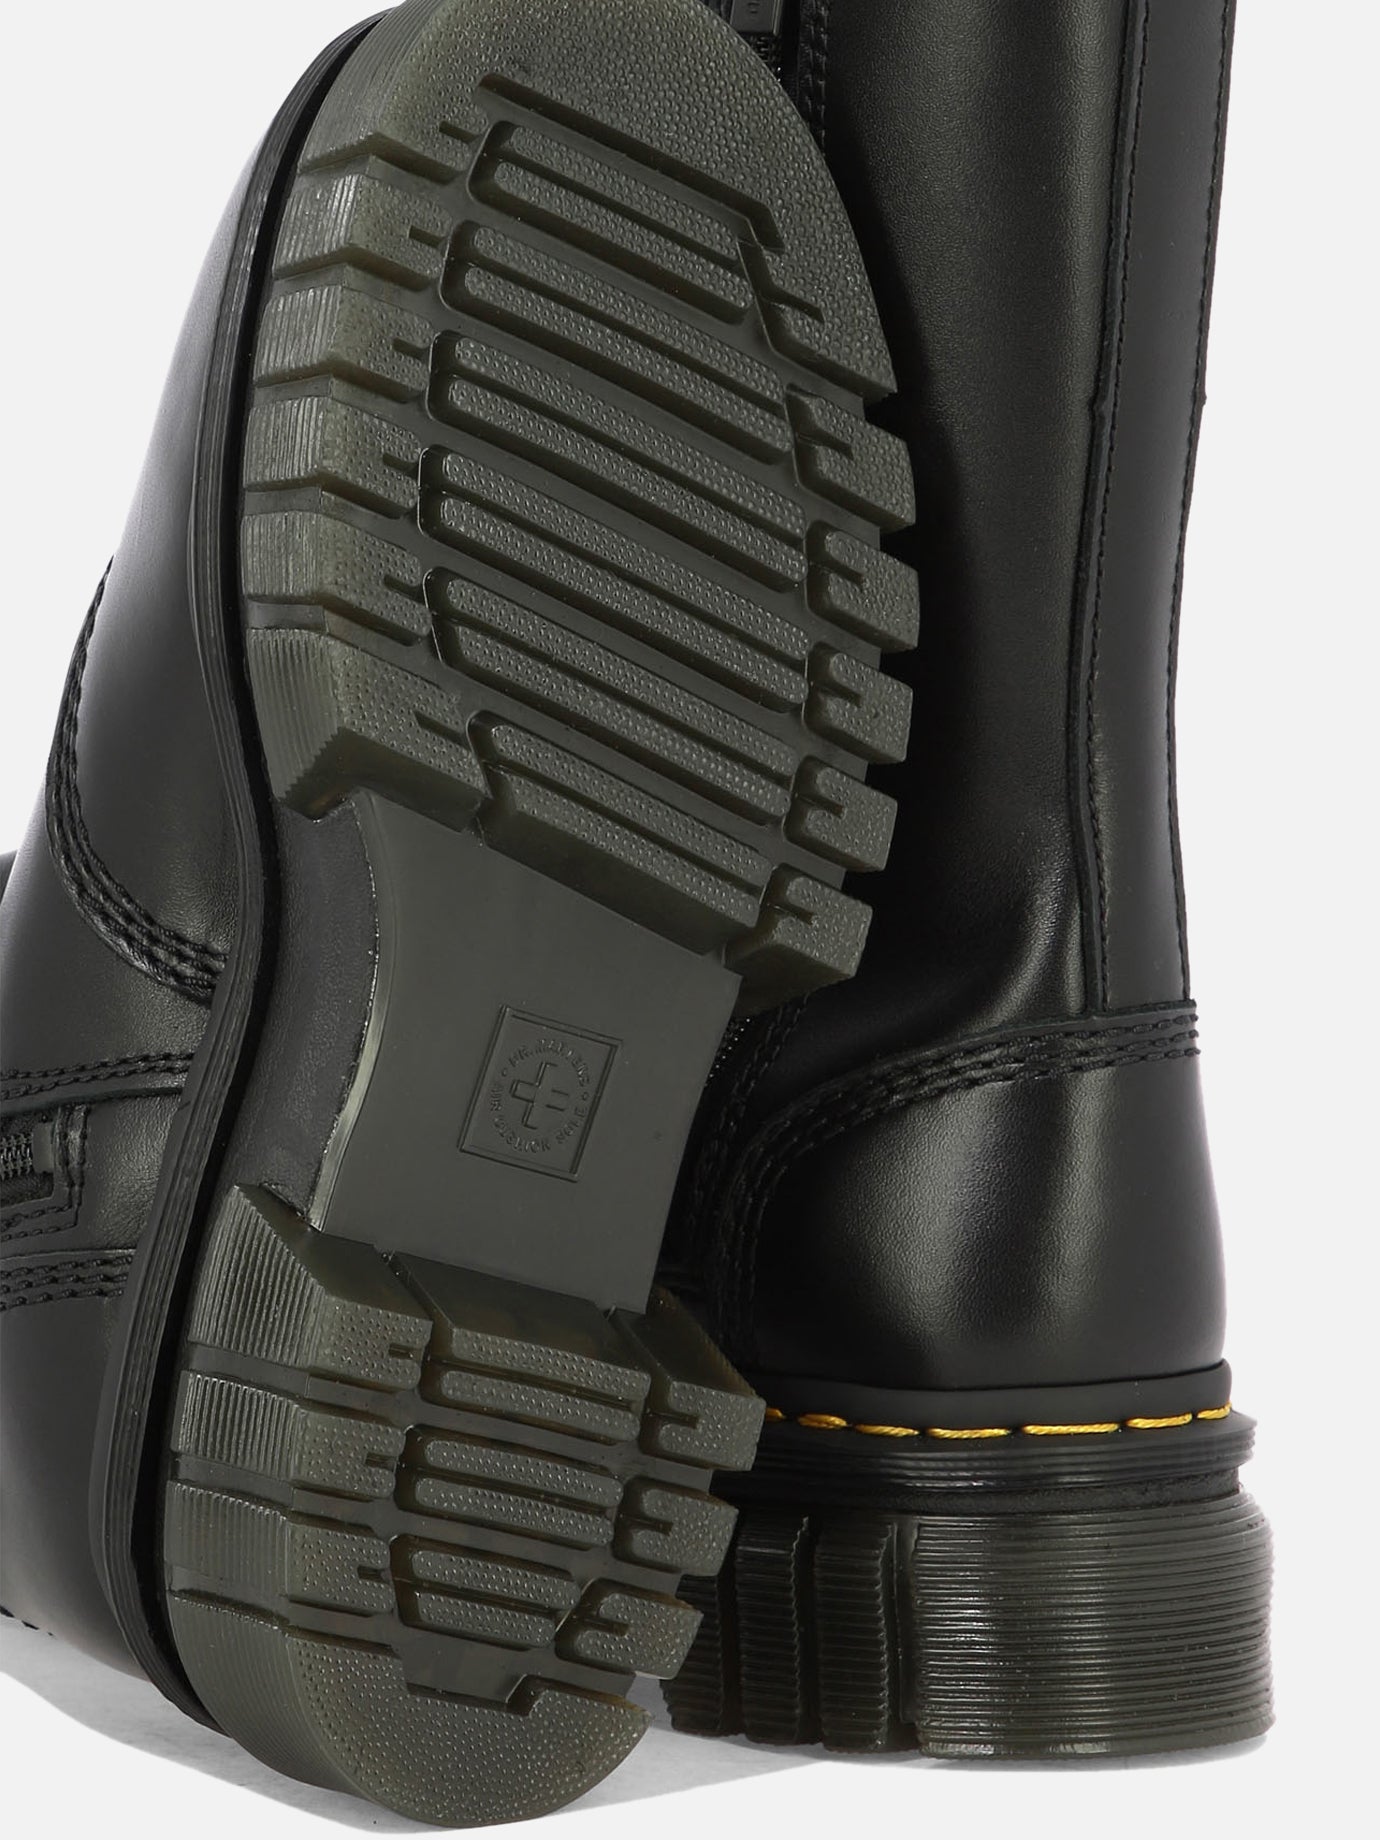 "AUDRICK CHELSEA TALL" boots